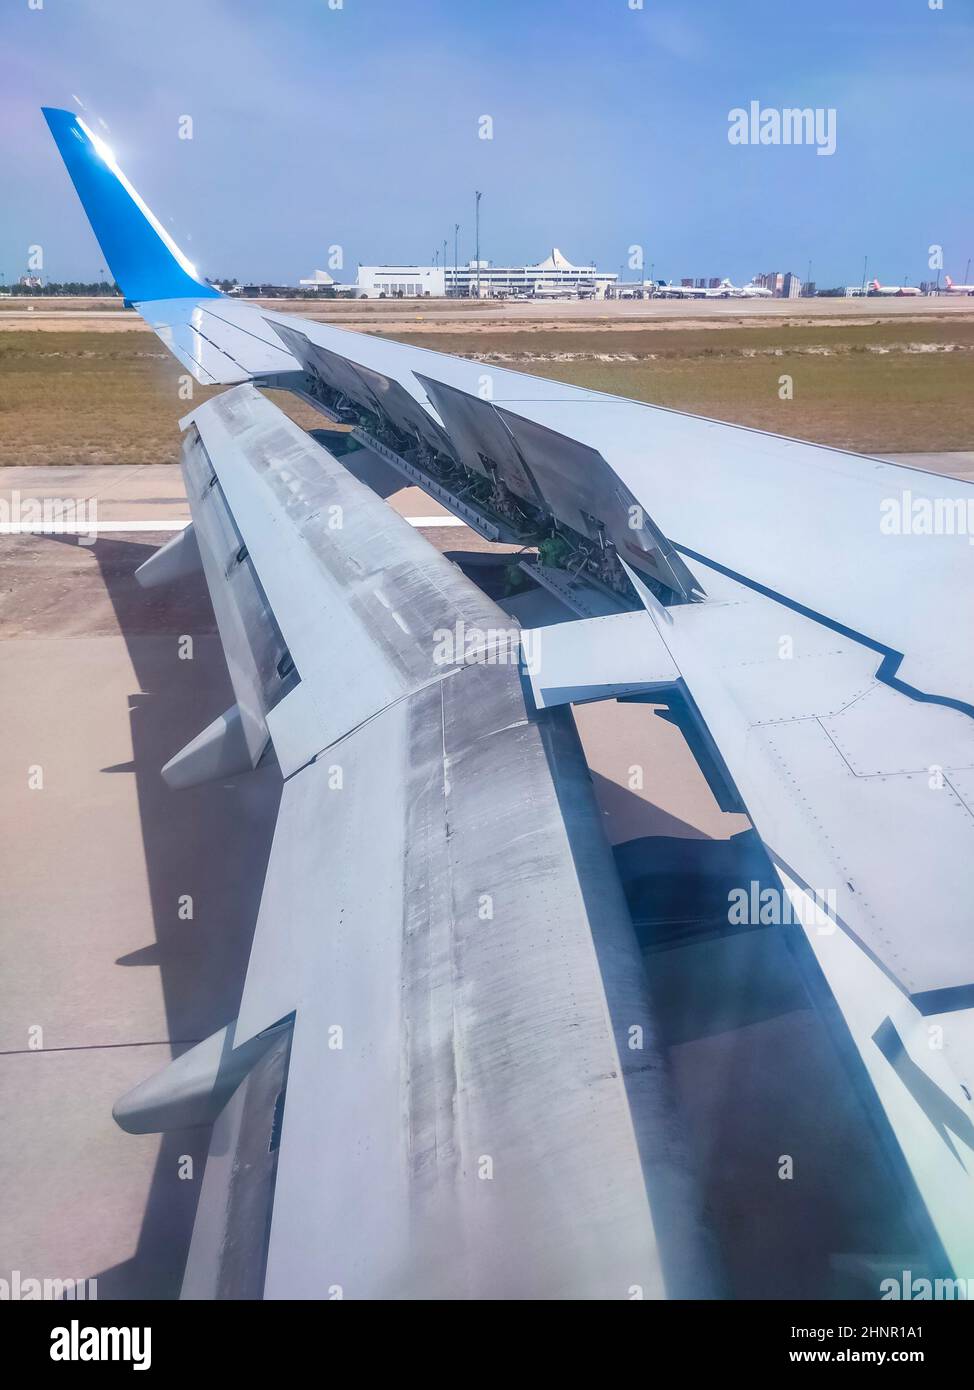 An airplane window view of wing and flaps after landing. Stock Photo